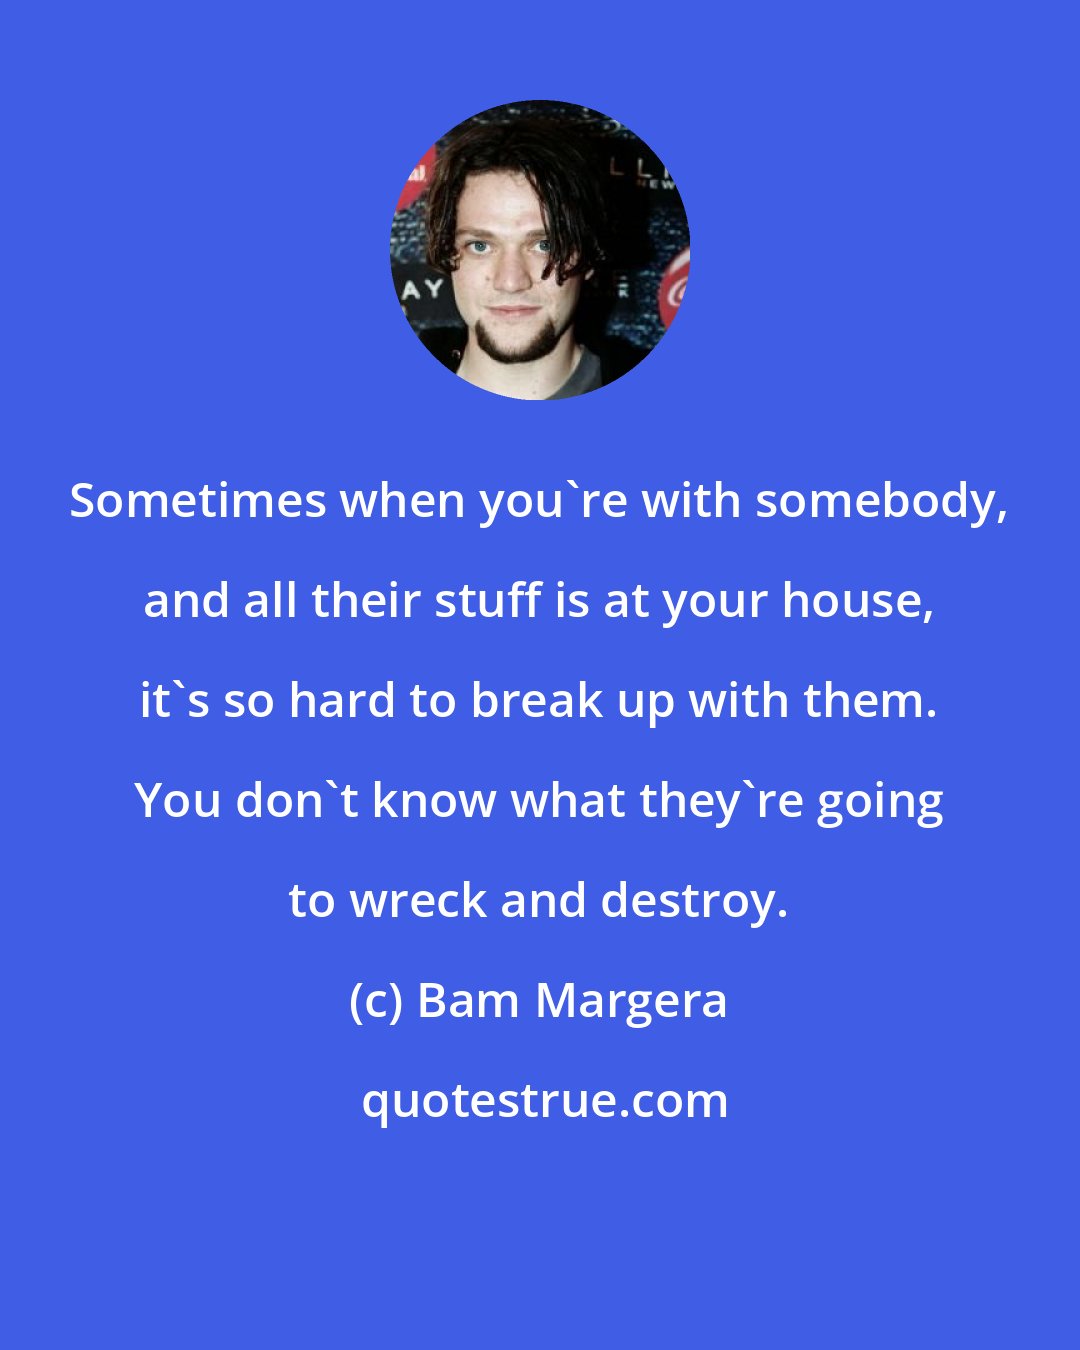 Bam Margera: Sometimes when you're with somebody, and all their stuff is at your house, it's so hard to break up with them. You don't know what they're going to wreck and destroy.